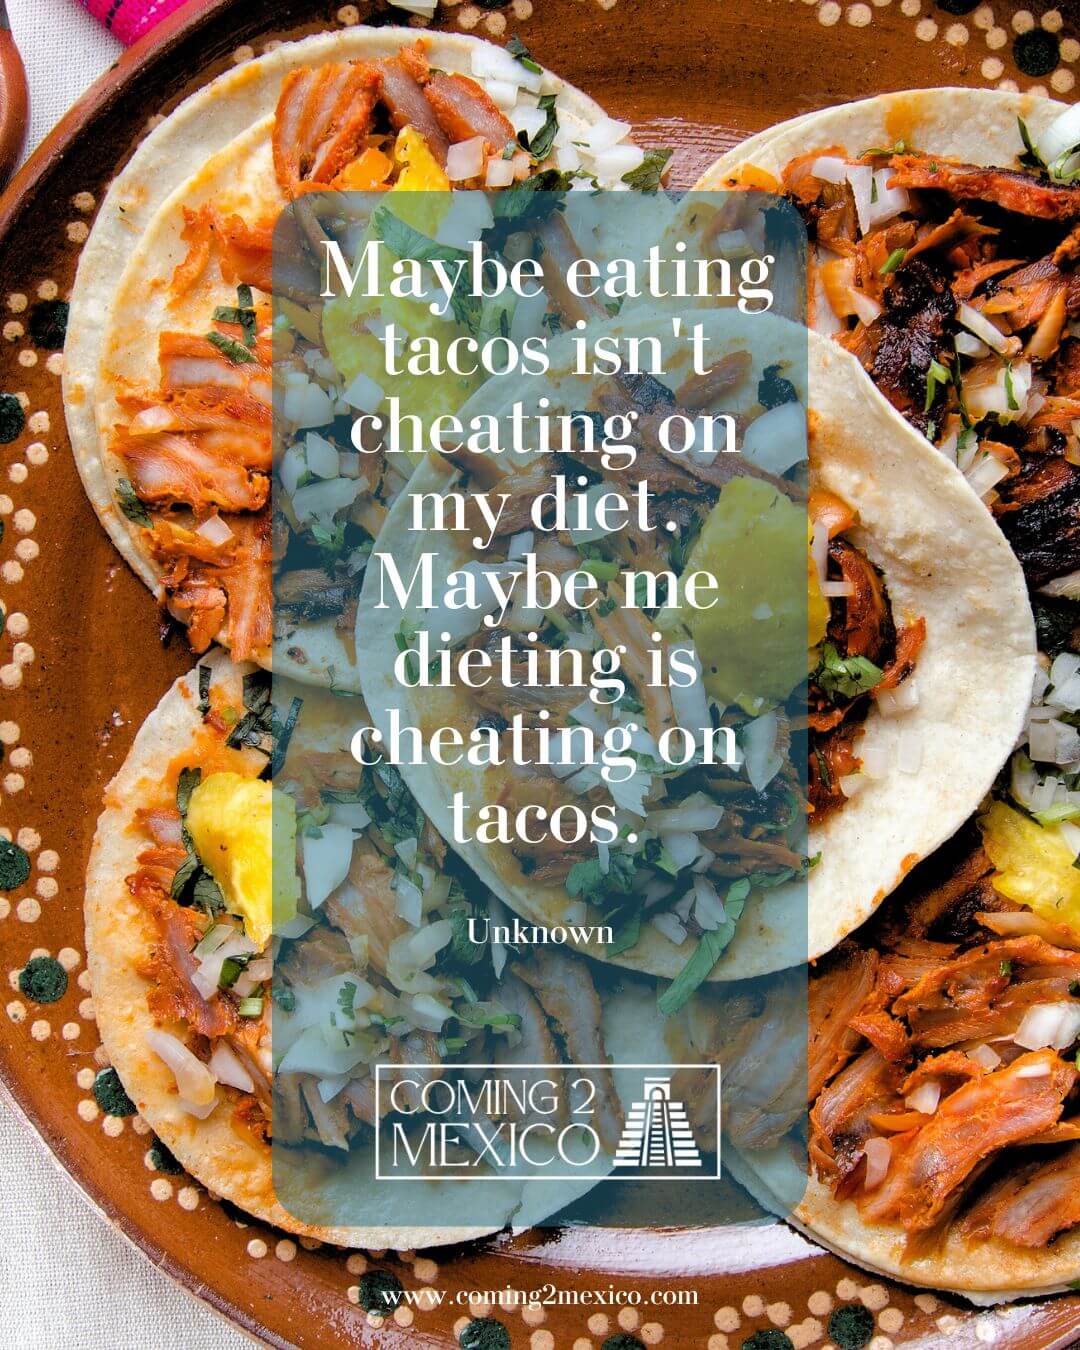 Maybe eating tacos isn't cheating on my diet. Maybe me dieting is cheating on tacos.